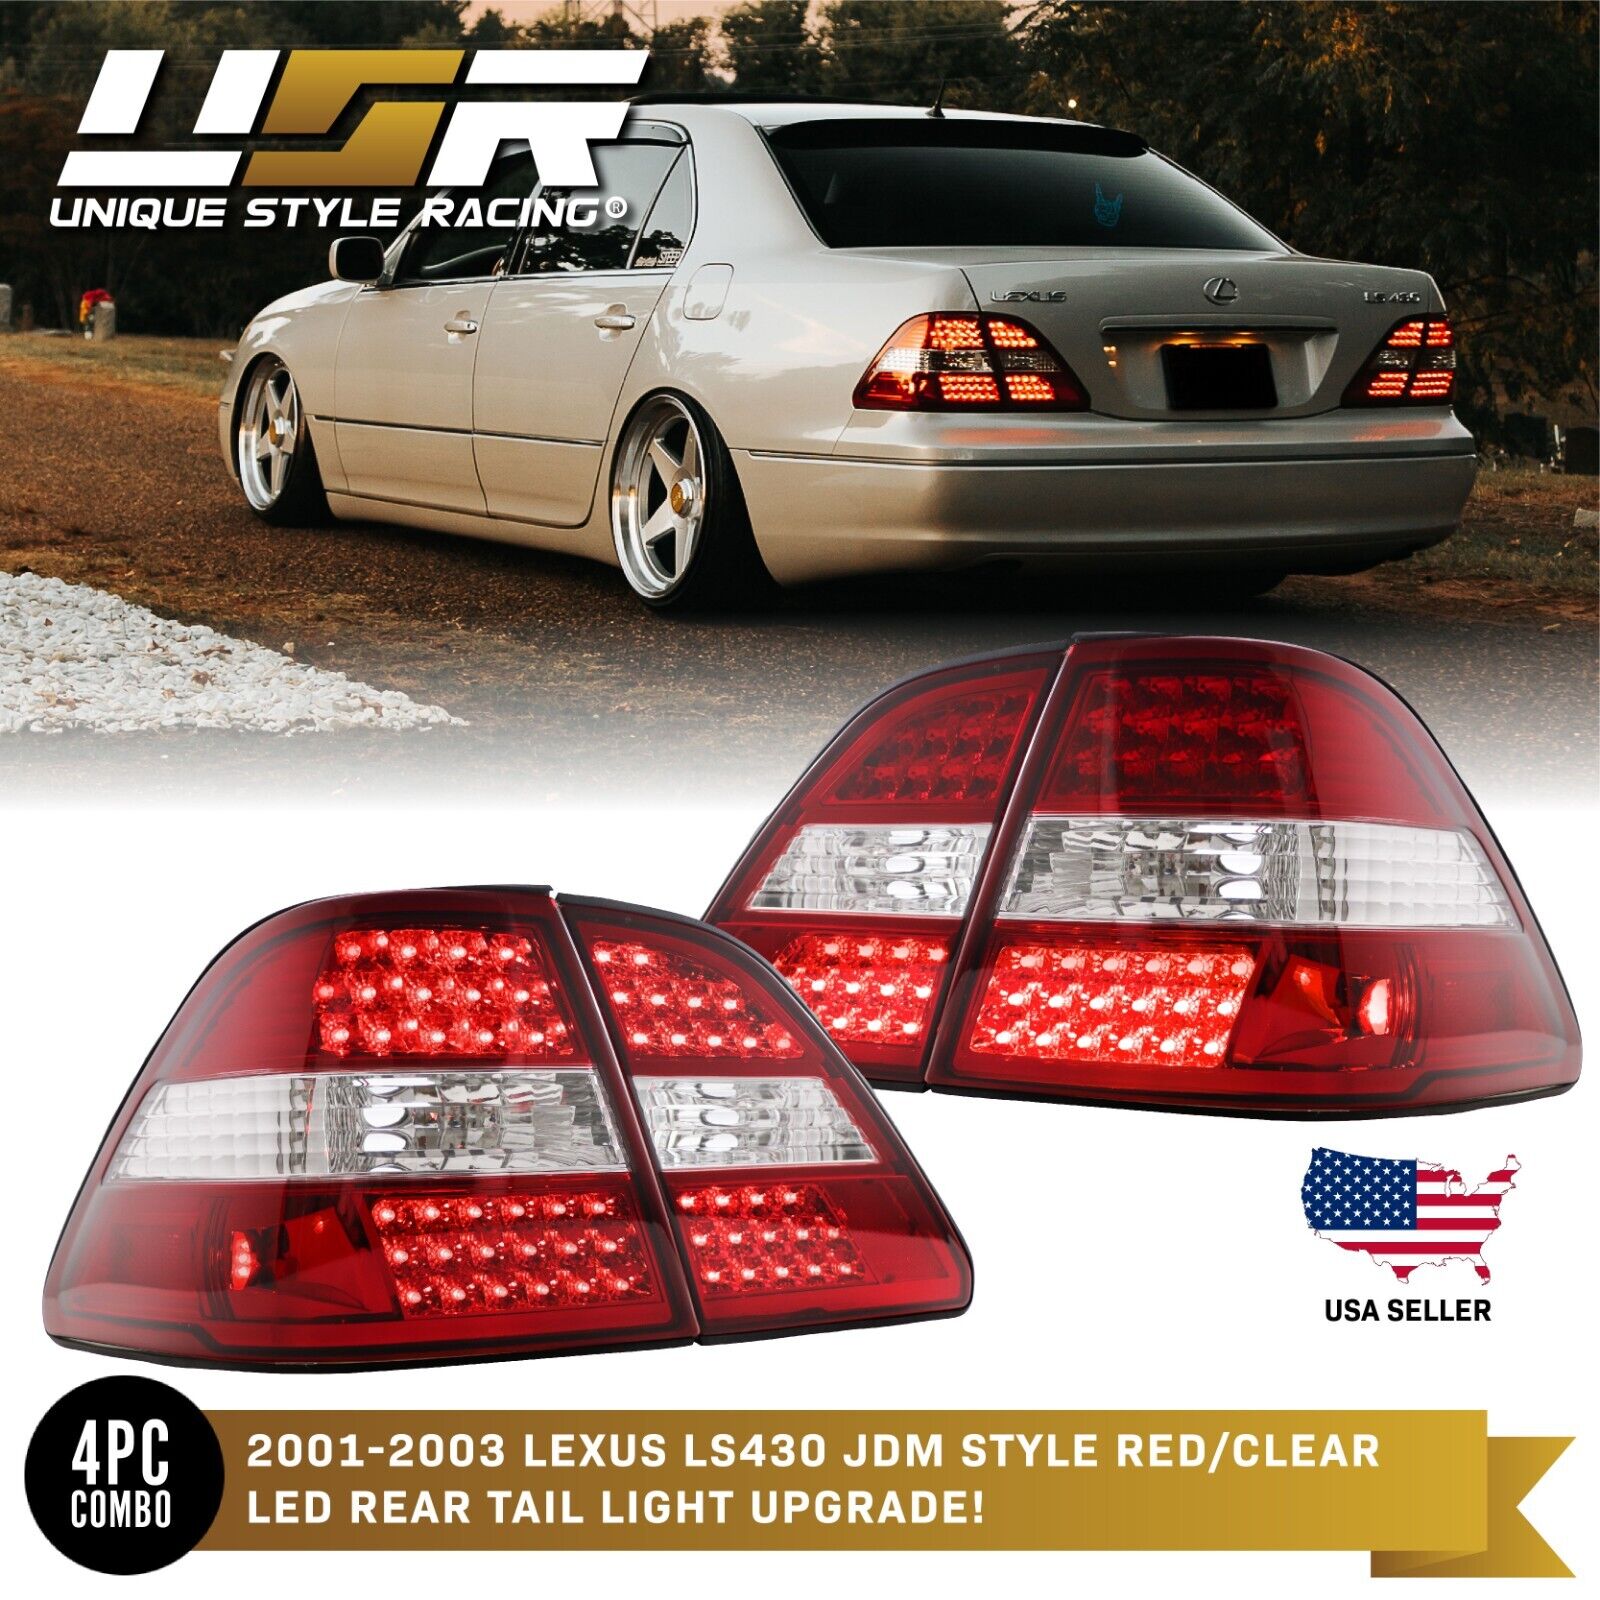 JDM Style LED Upgrade Red/Clear 4 Pc Tail Light For 2001-2003 Lexus LS430 LS 430